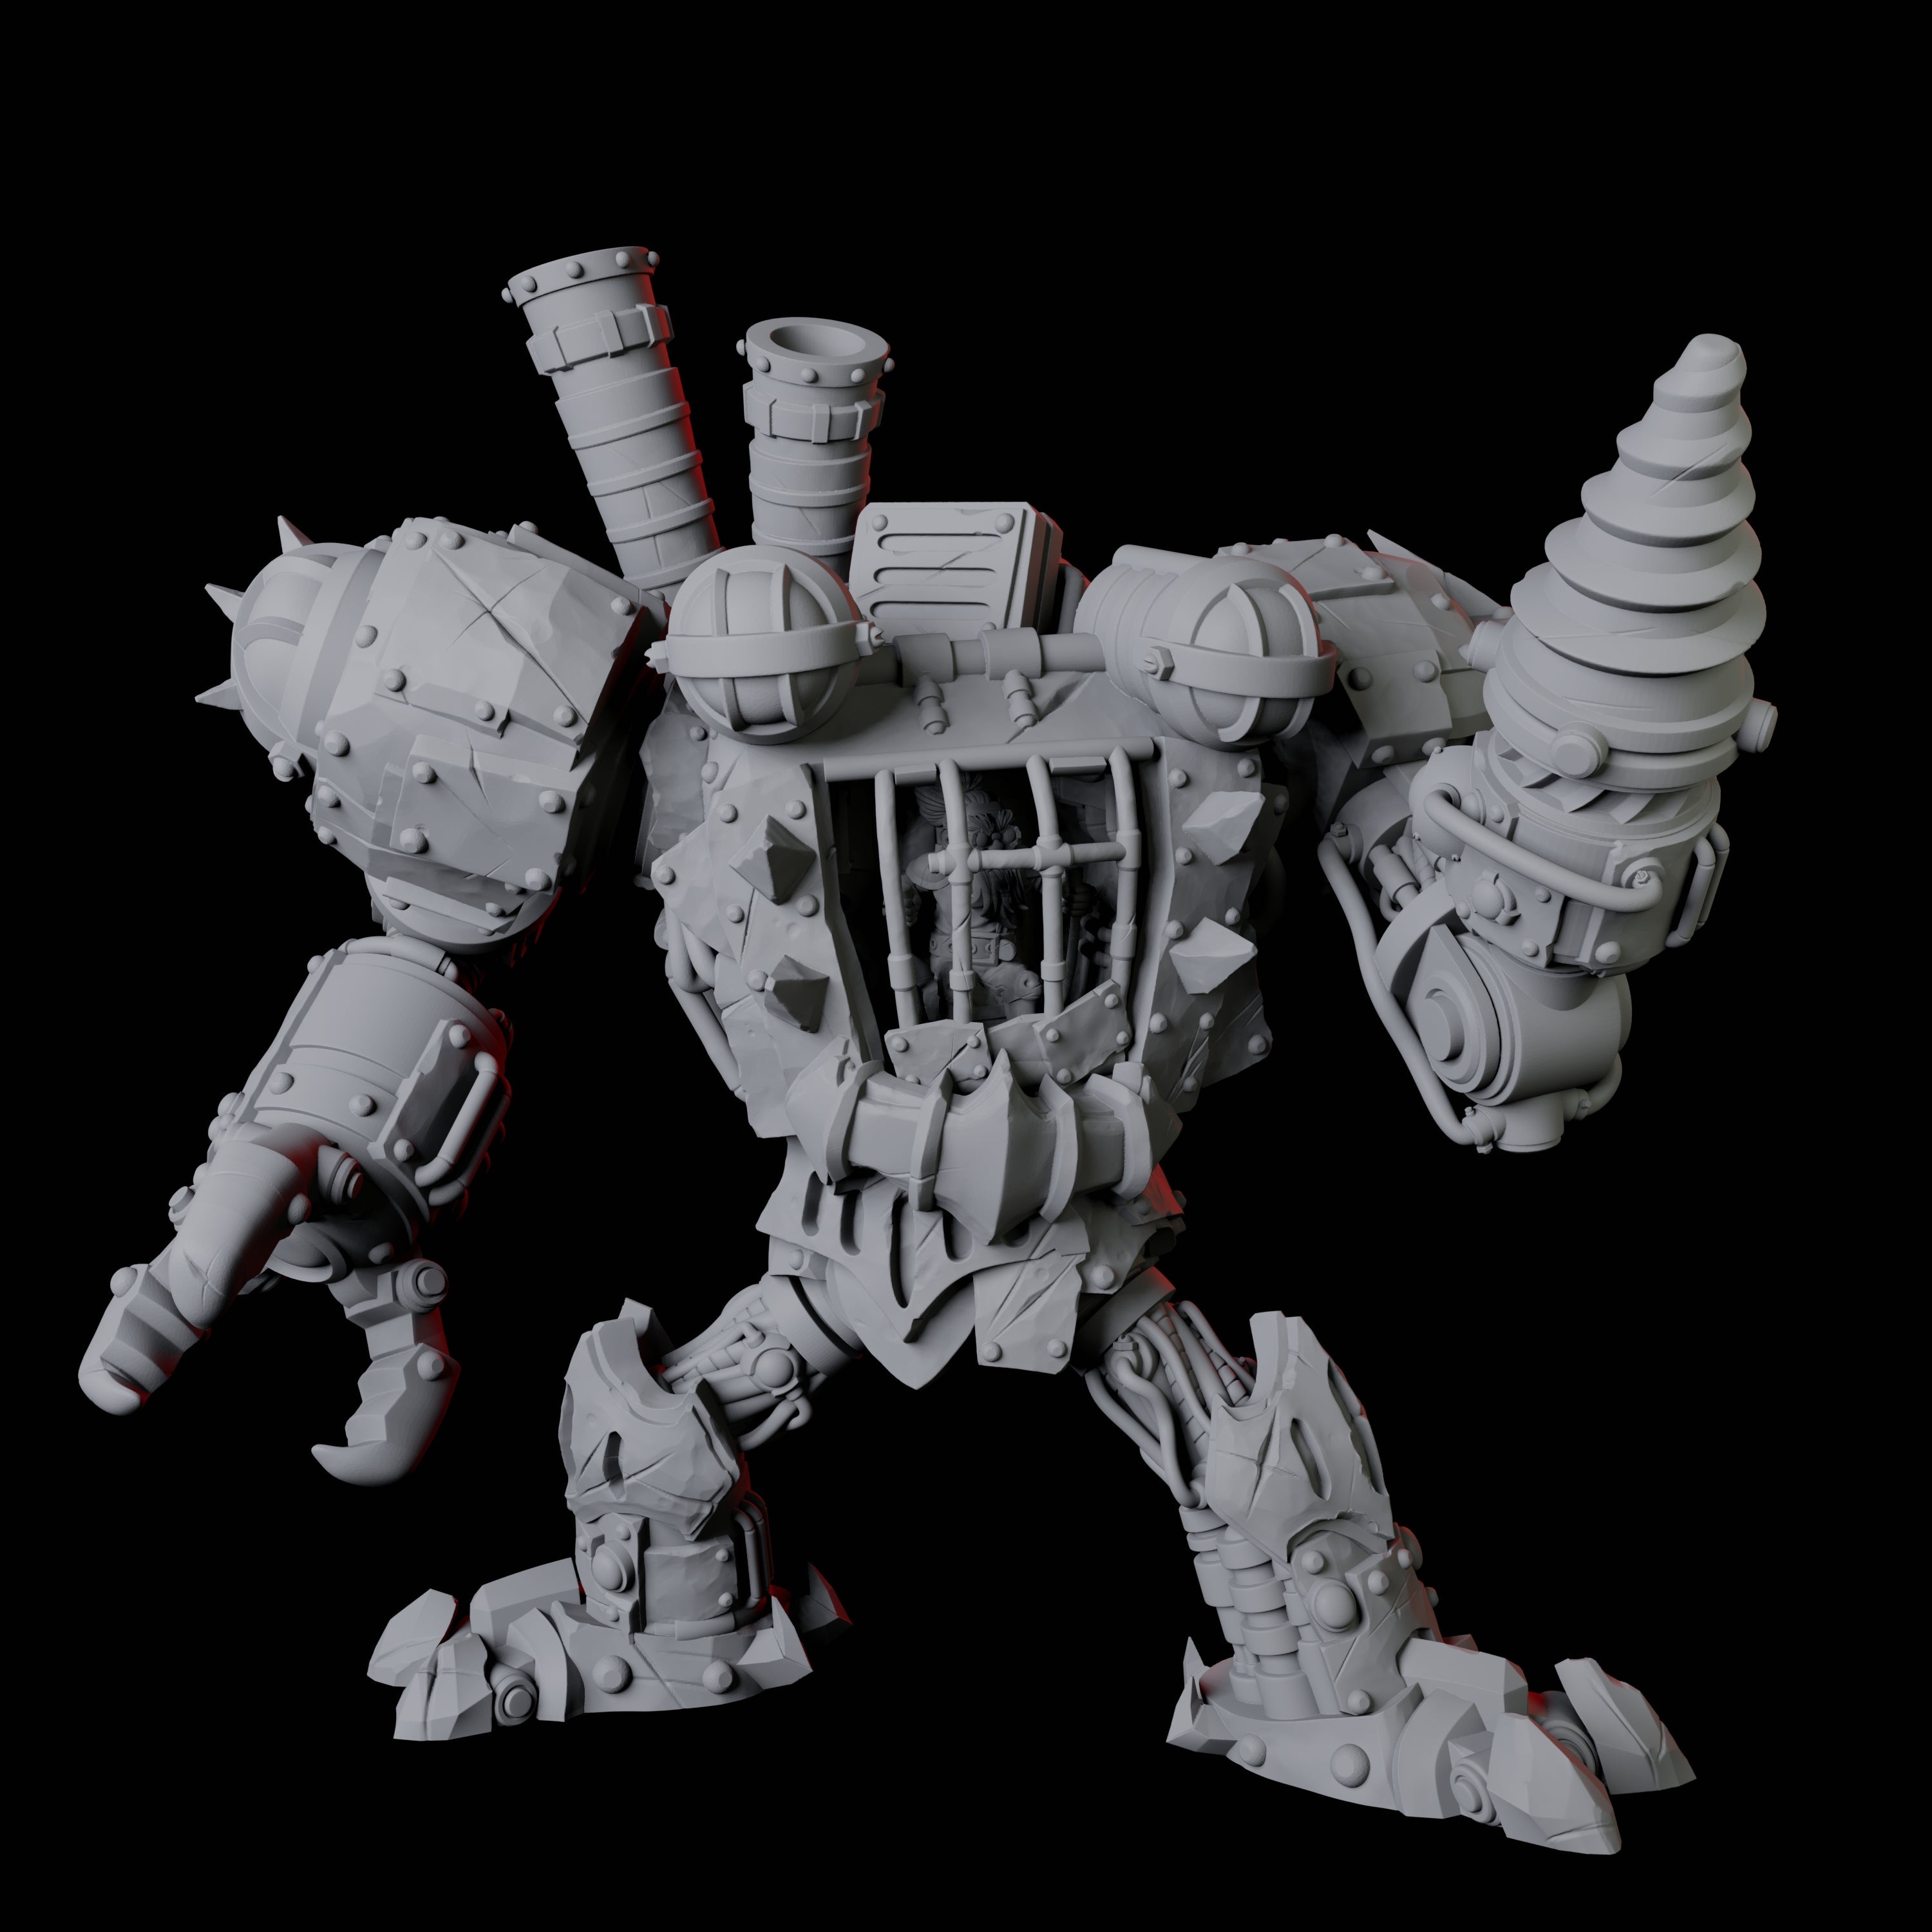 Gnome Mech Suit Miniature for Dungeons and Dragons